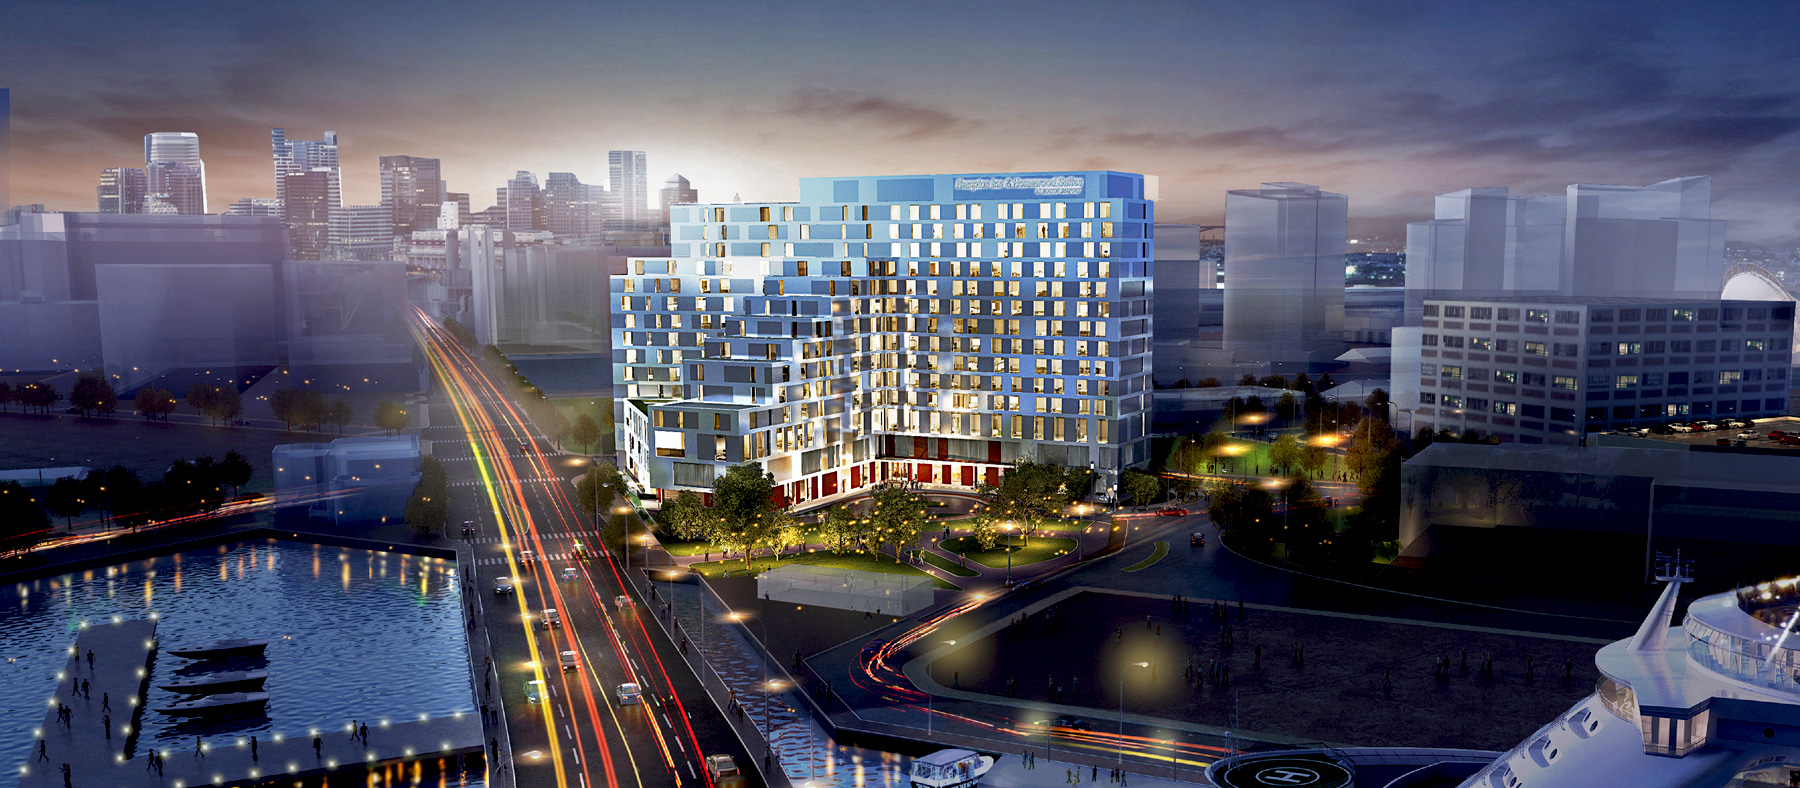 photo rendering of 510 room dual-brand hotel project at Parcel A in the Seaport